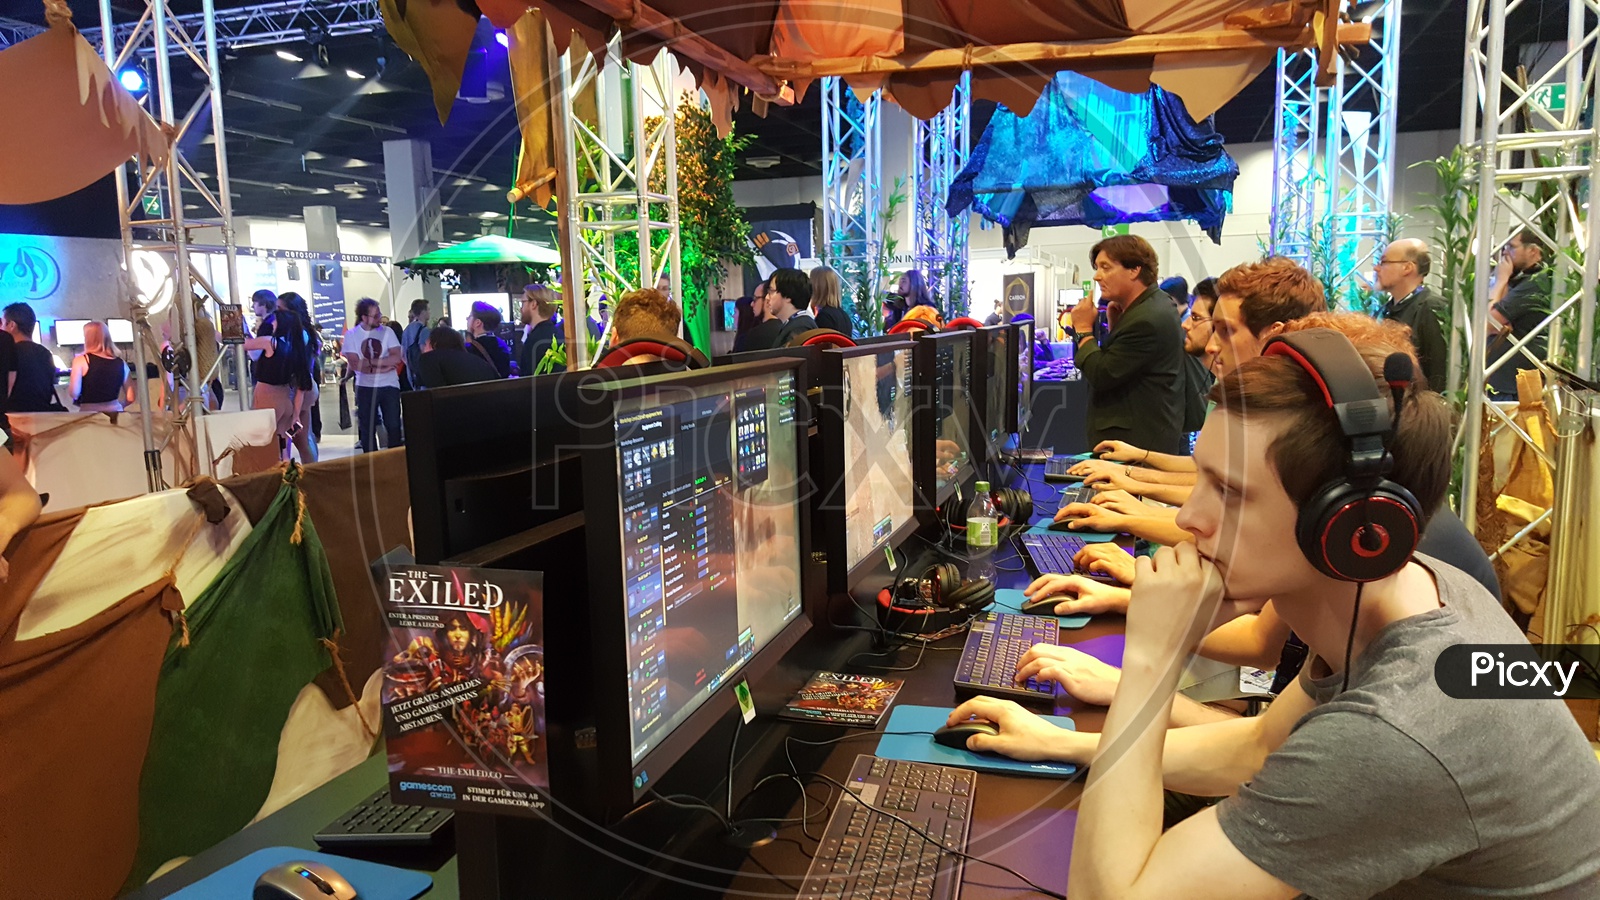 Gamer's Playing Video Games at Gamescom, Cologne